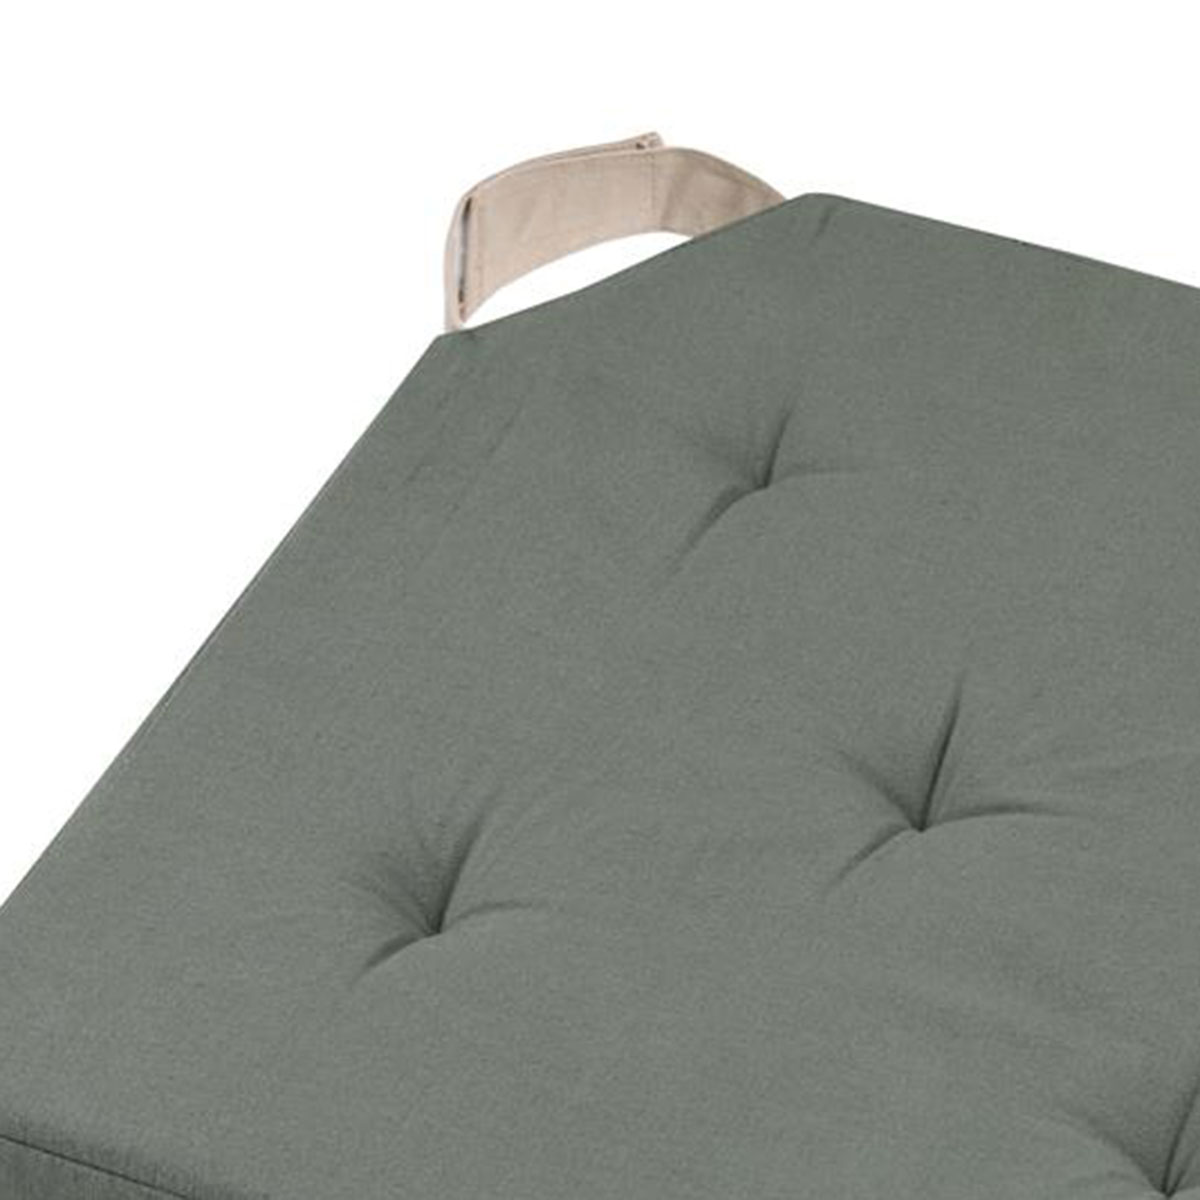 Reversible chair cushion 38 x 38 cm - Blue-green and linen